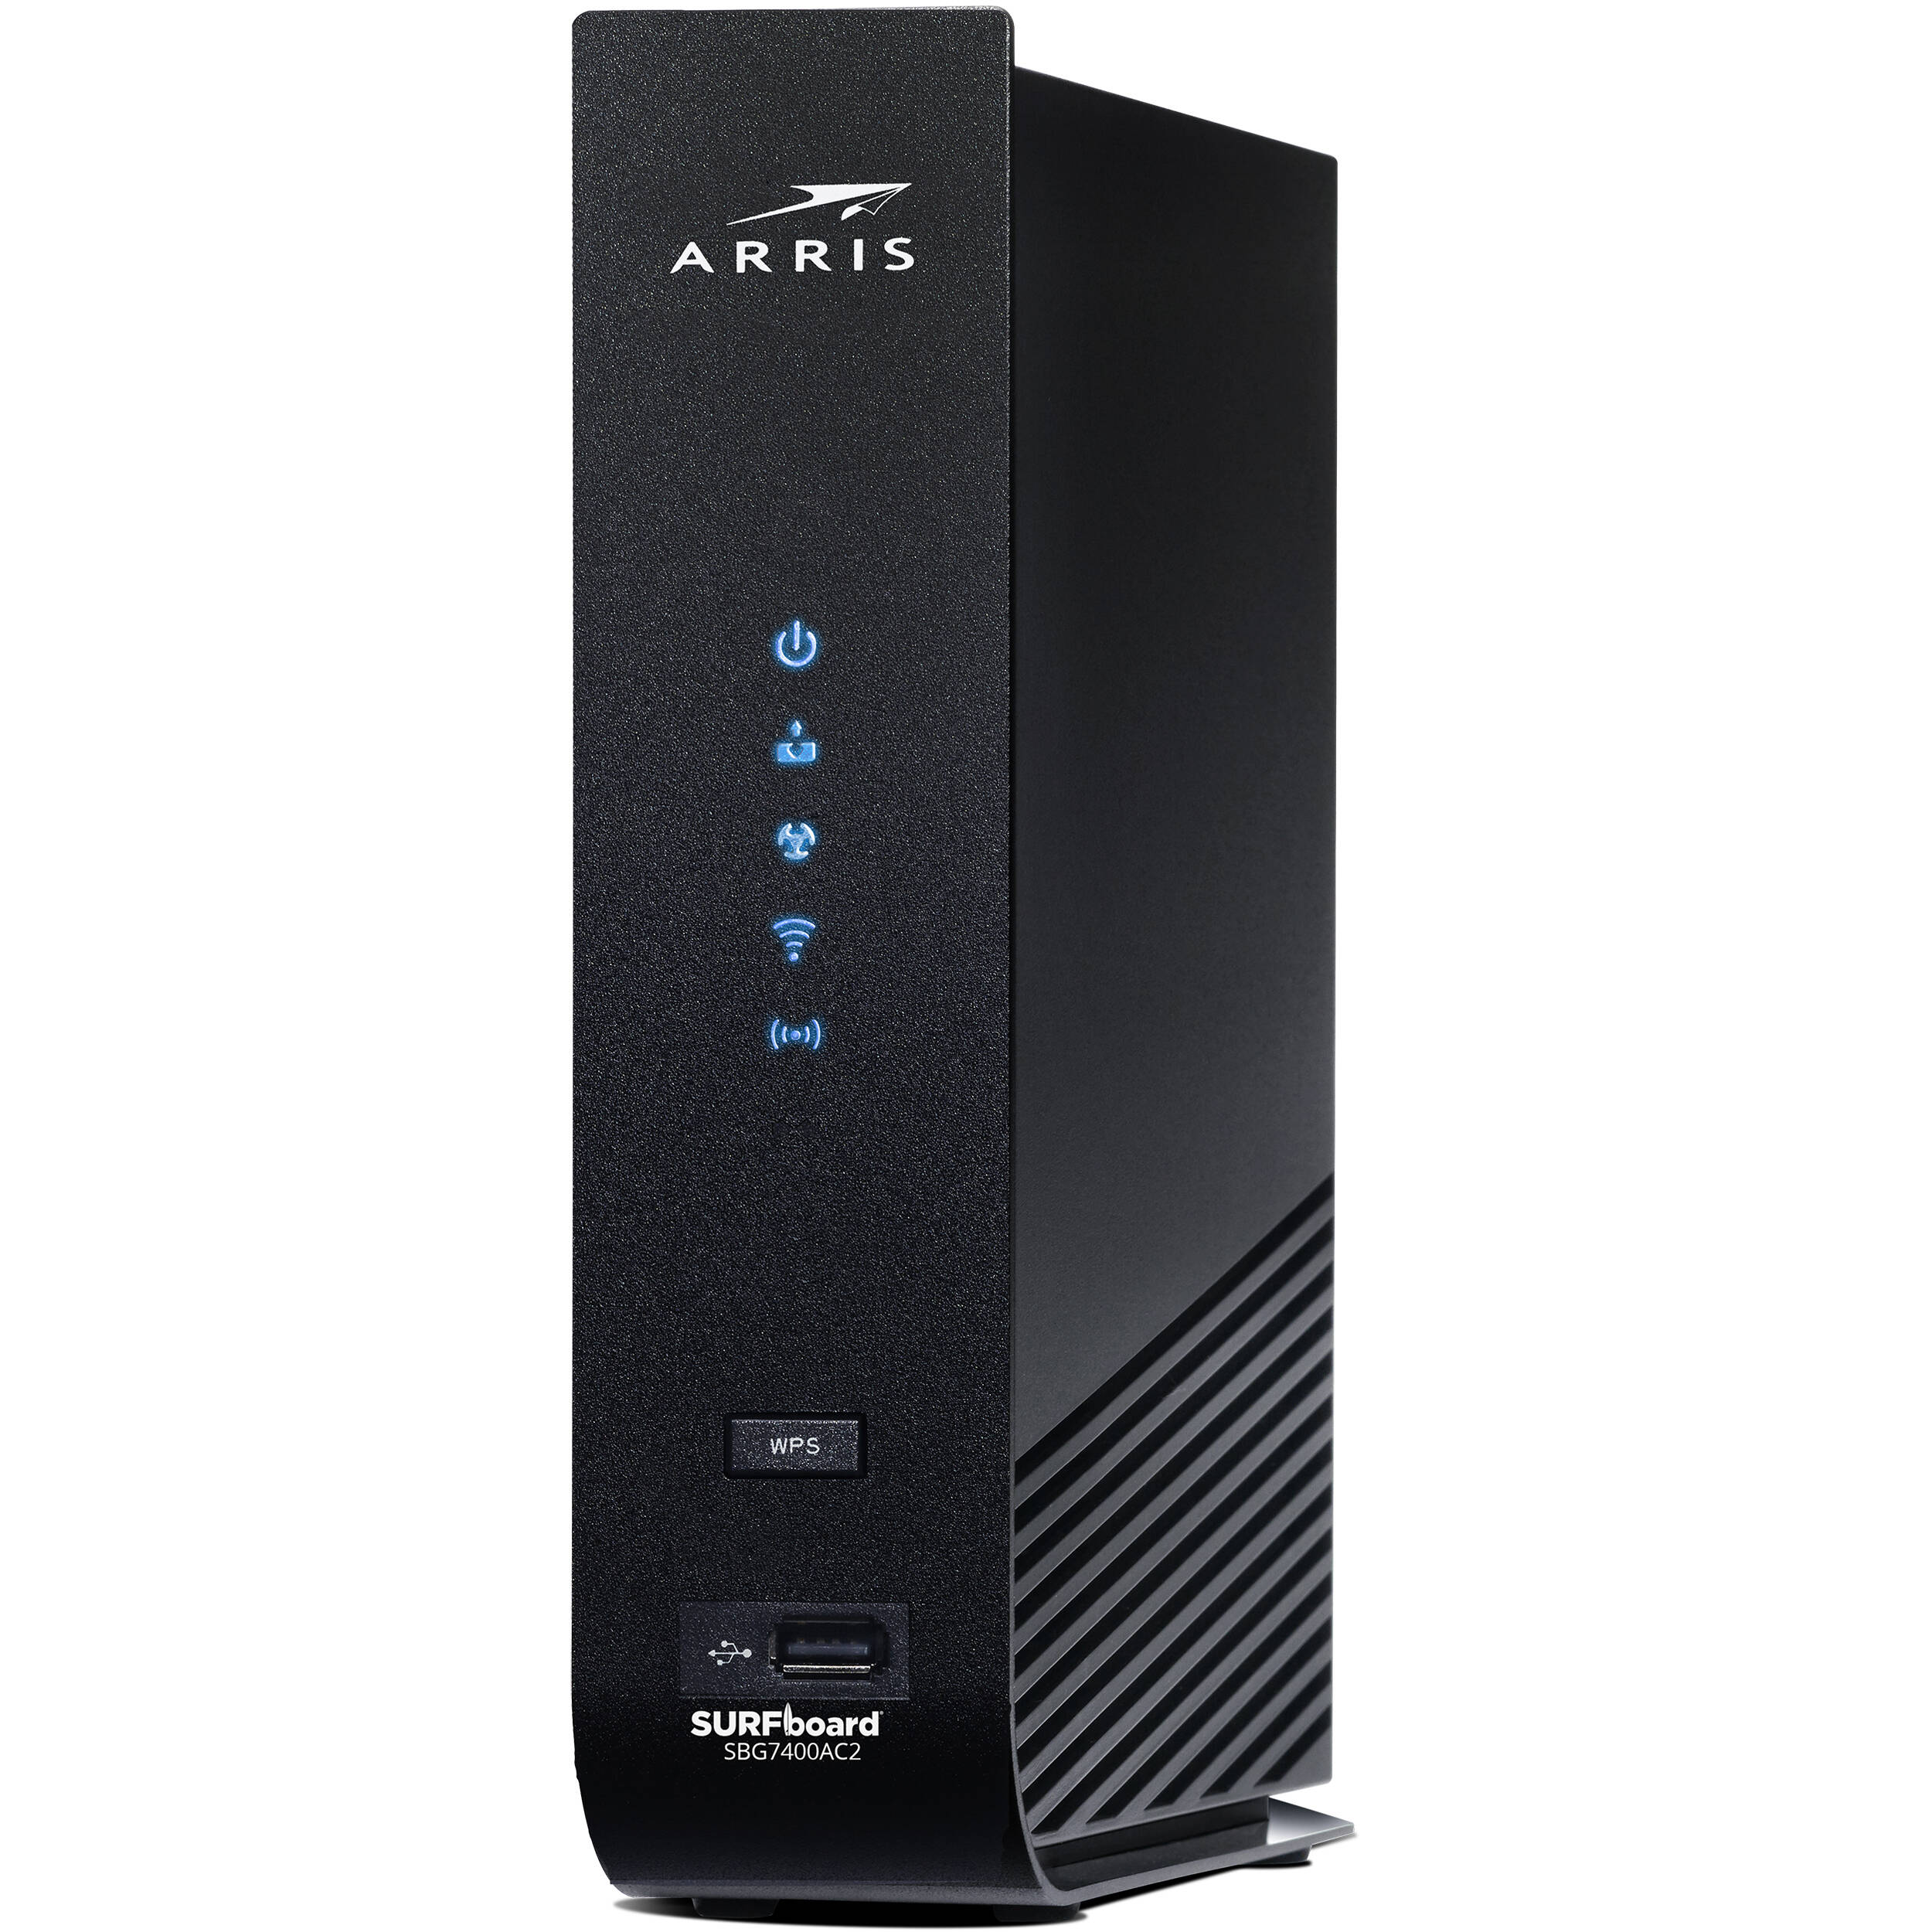 ARRIS SURFboard SBG7400AC2-RB DOCSIS 3.0 Cable Modem & AC2350 Wi-Fi Router - Certified Refurbished